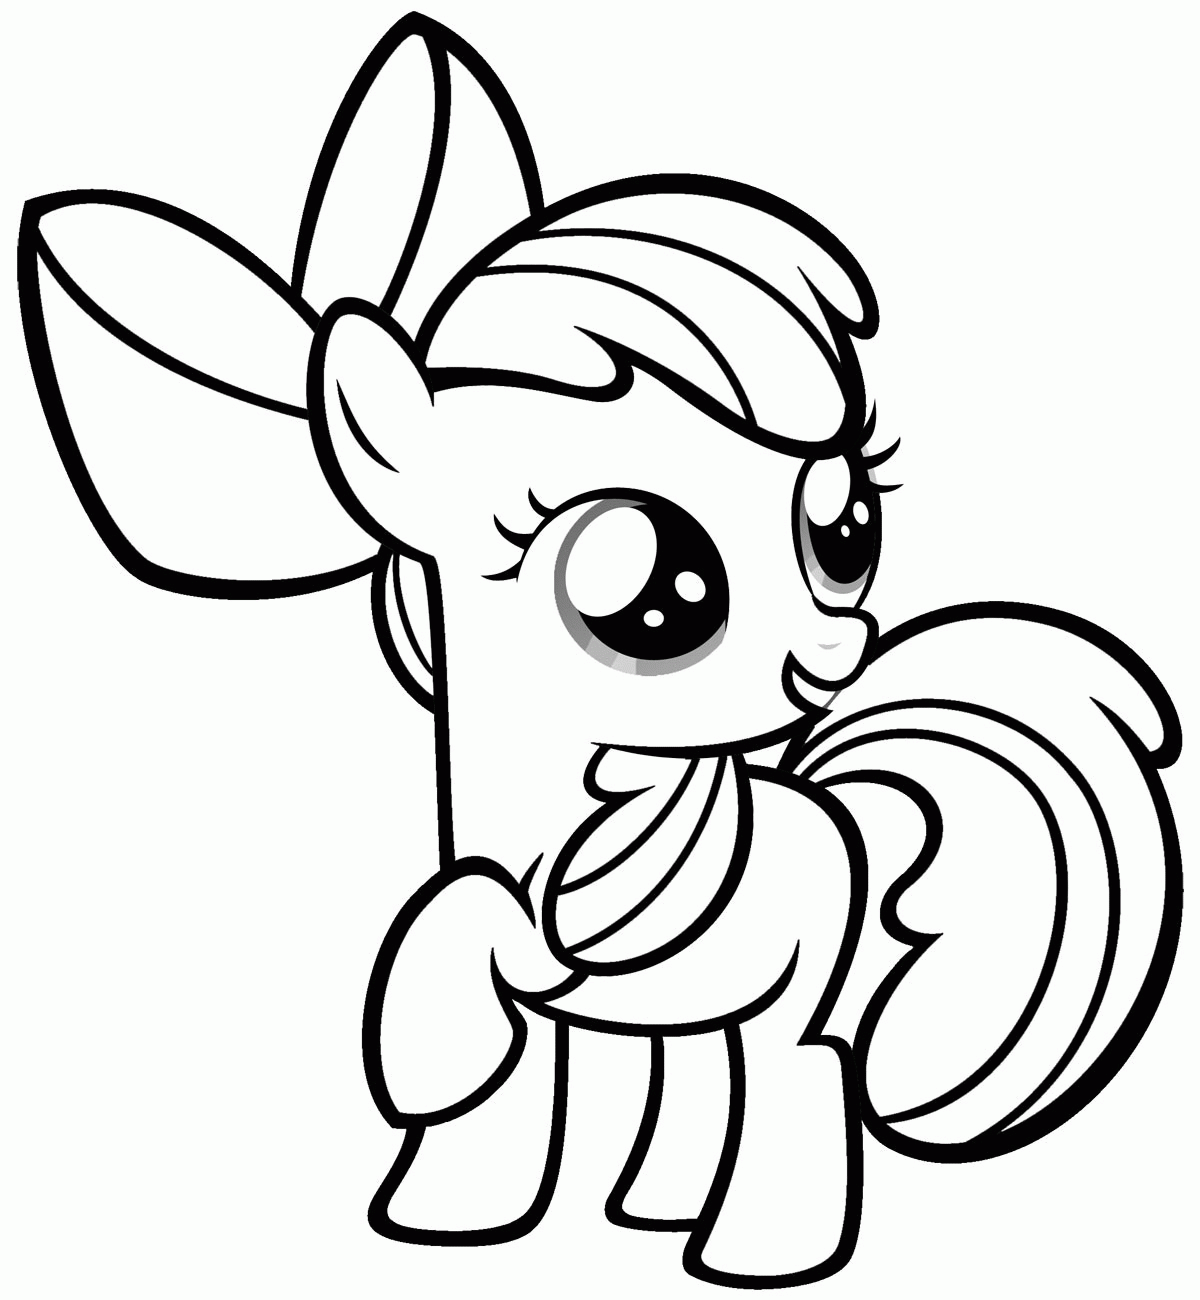 Coloring pages of ponies | www.veupropia.org